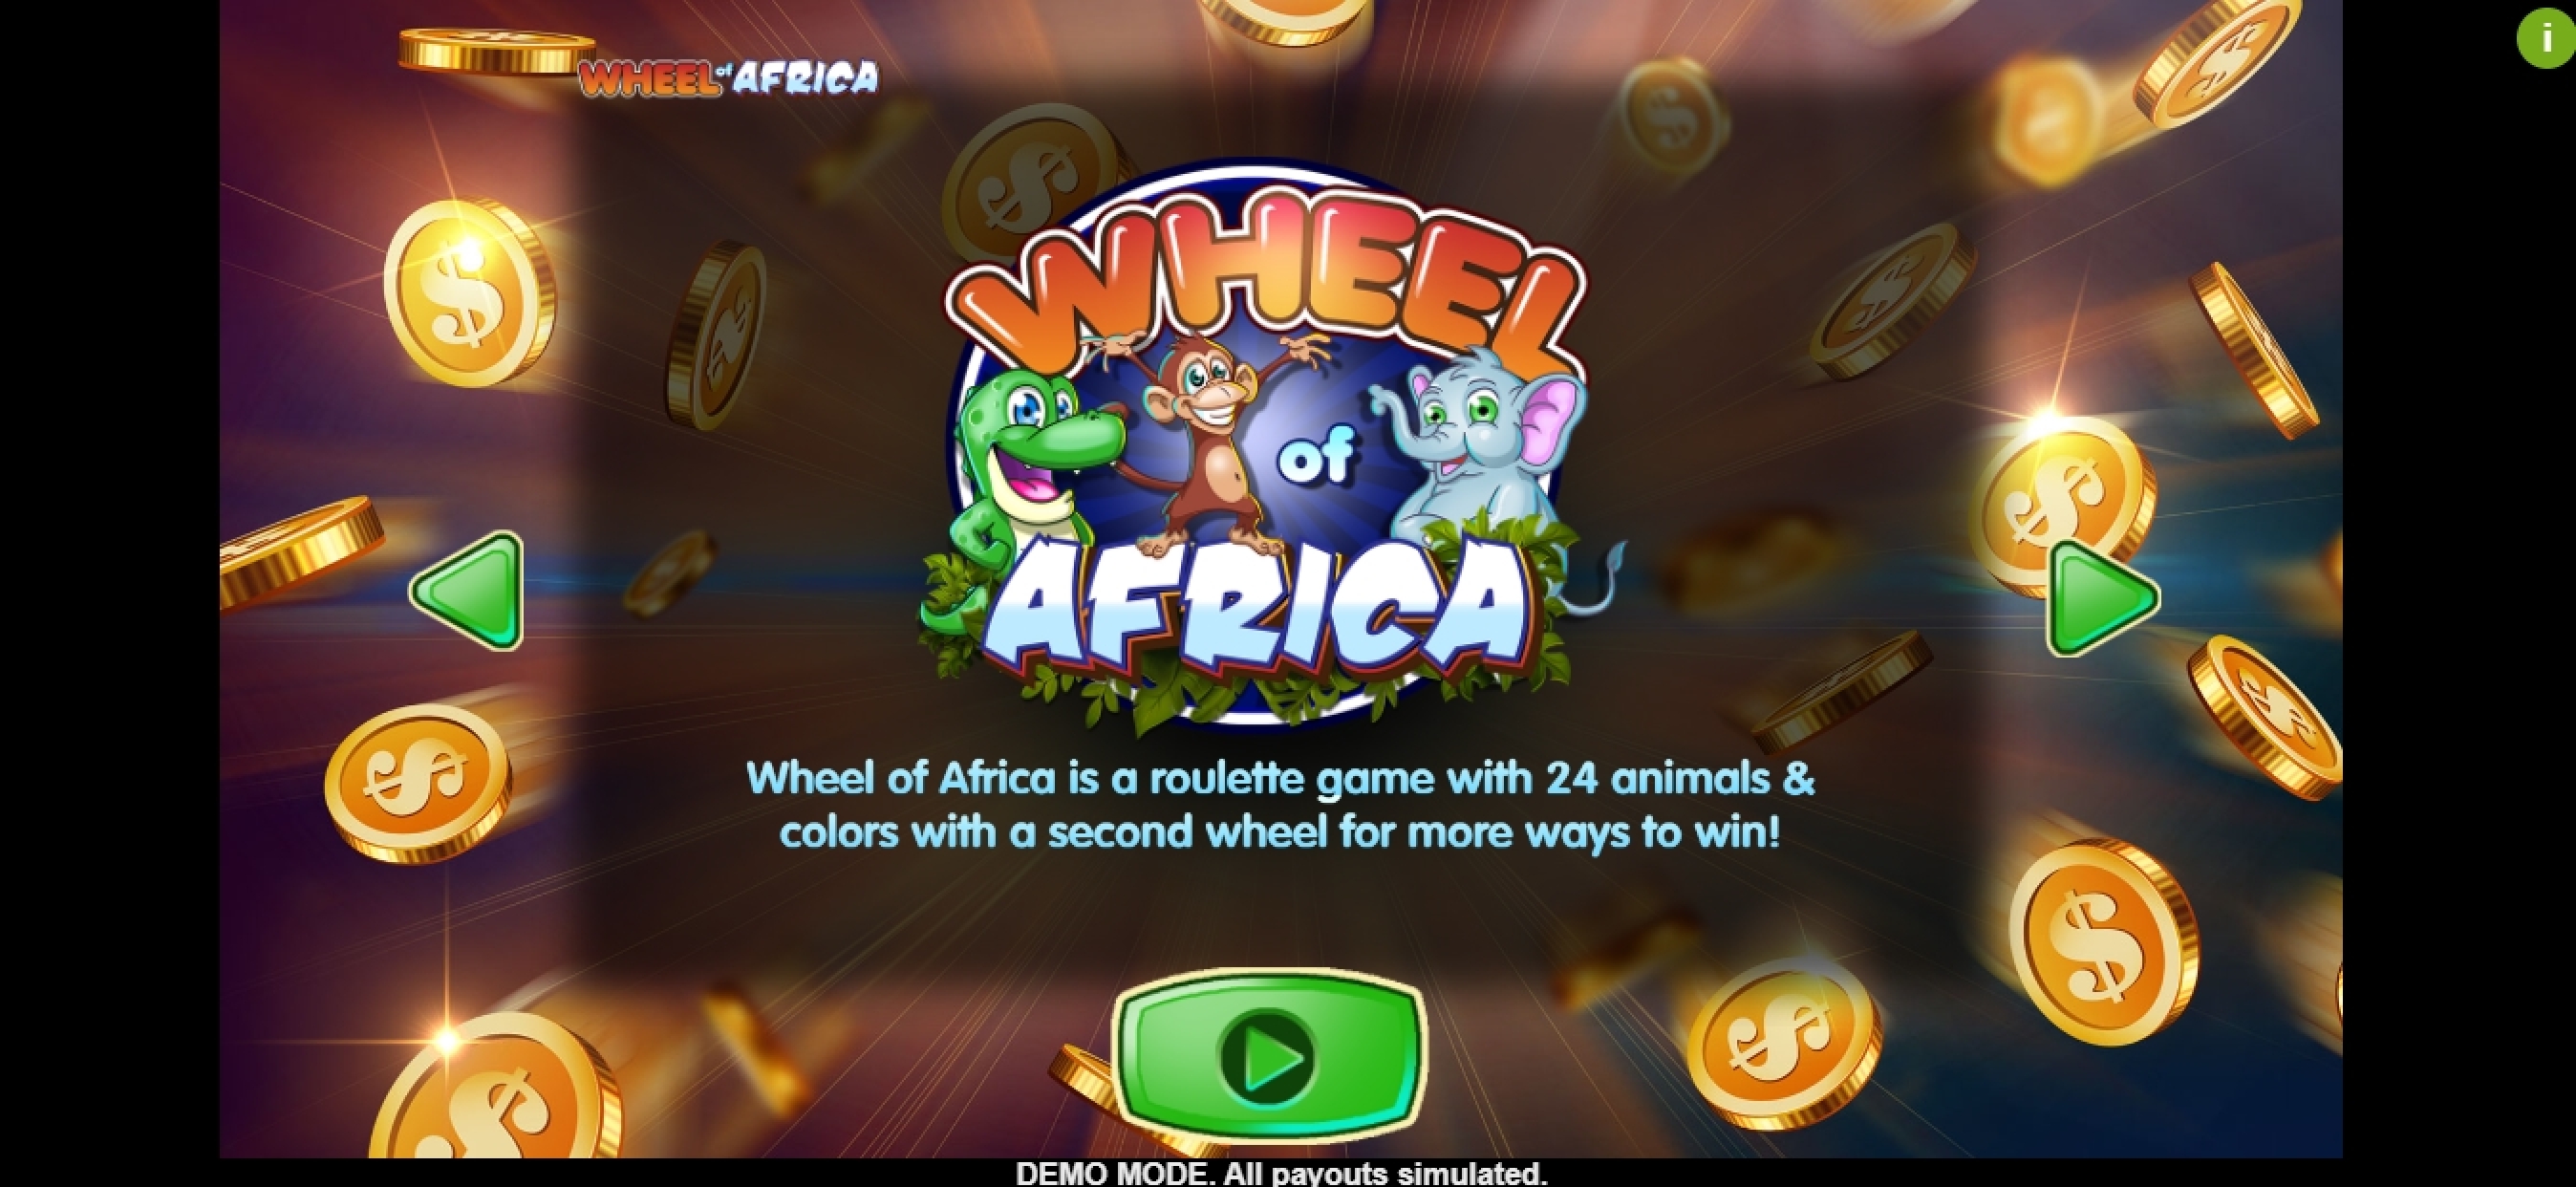 Play Wheel of Africa Free Casino Slot Game by Asylum Labs